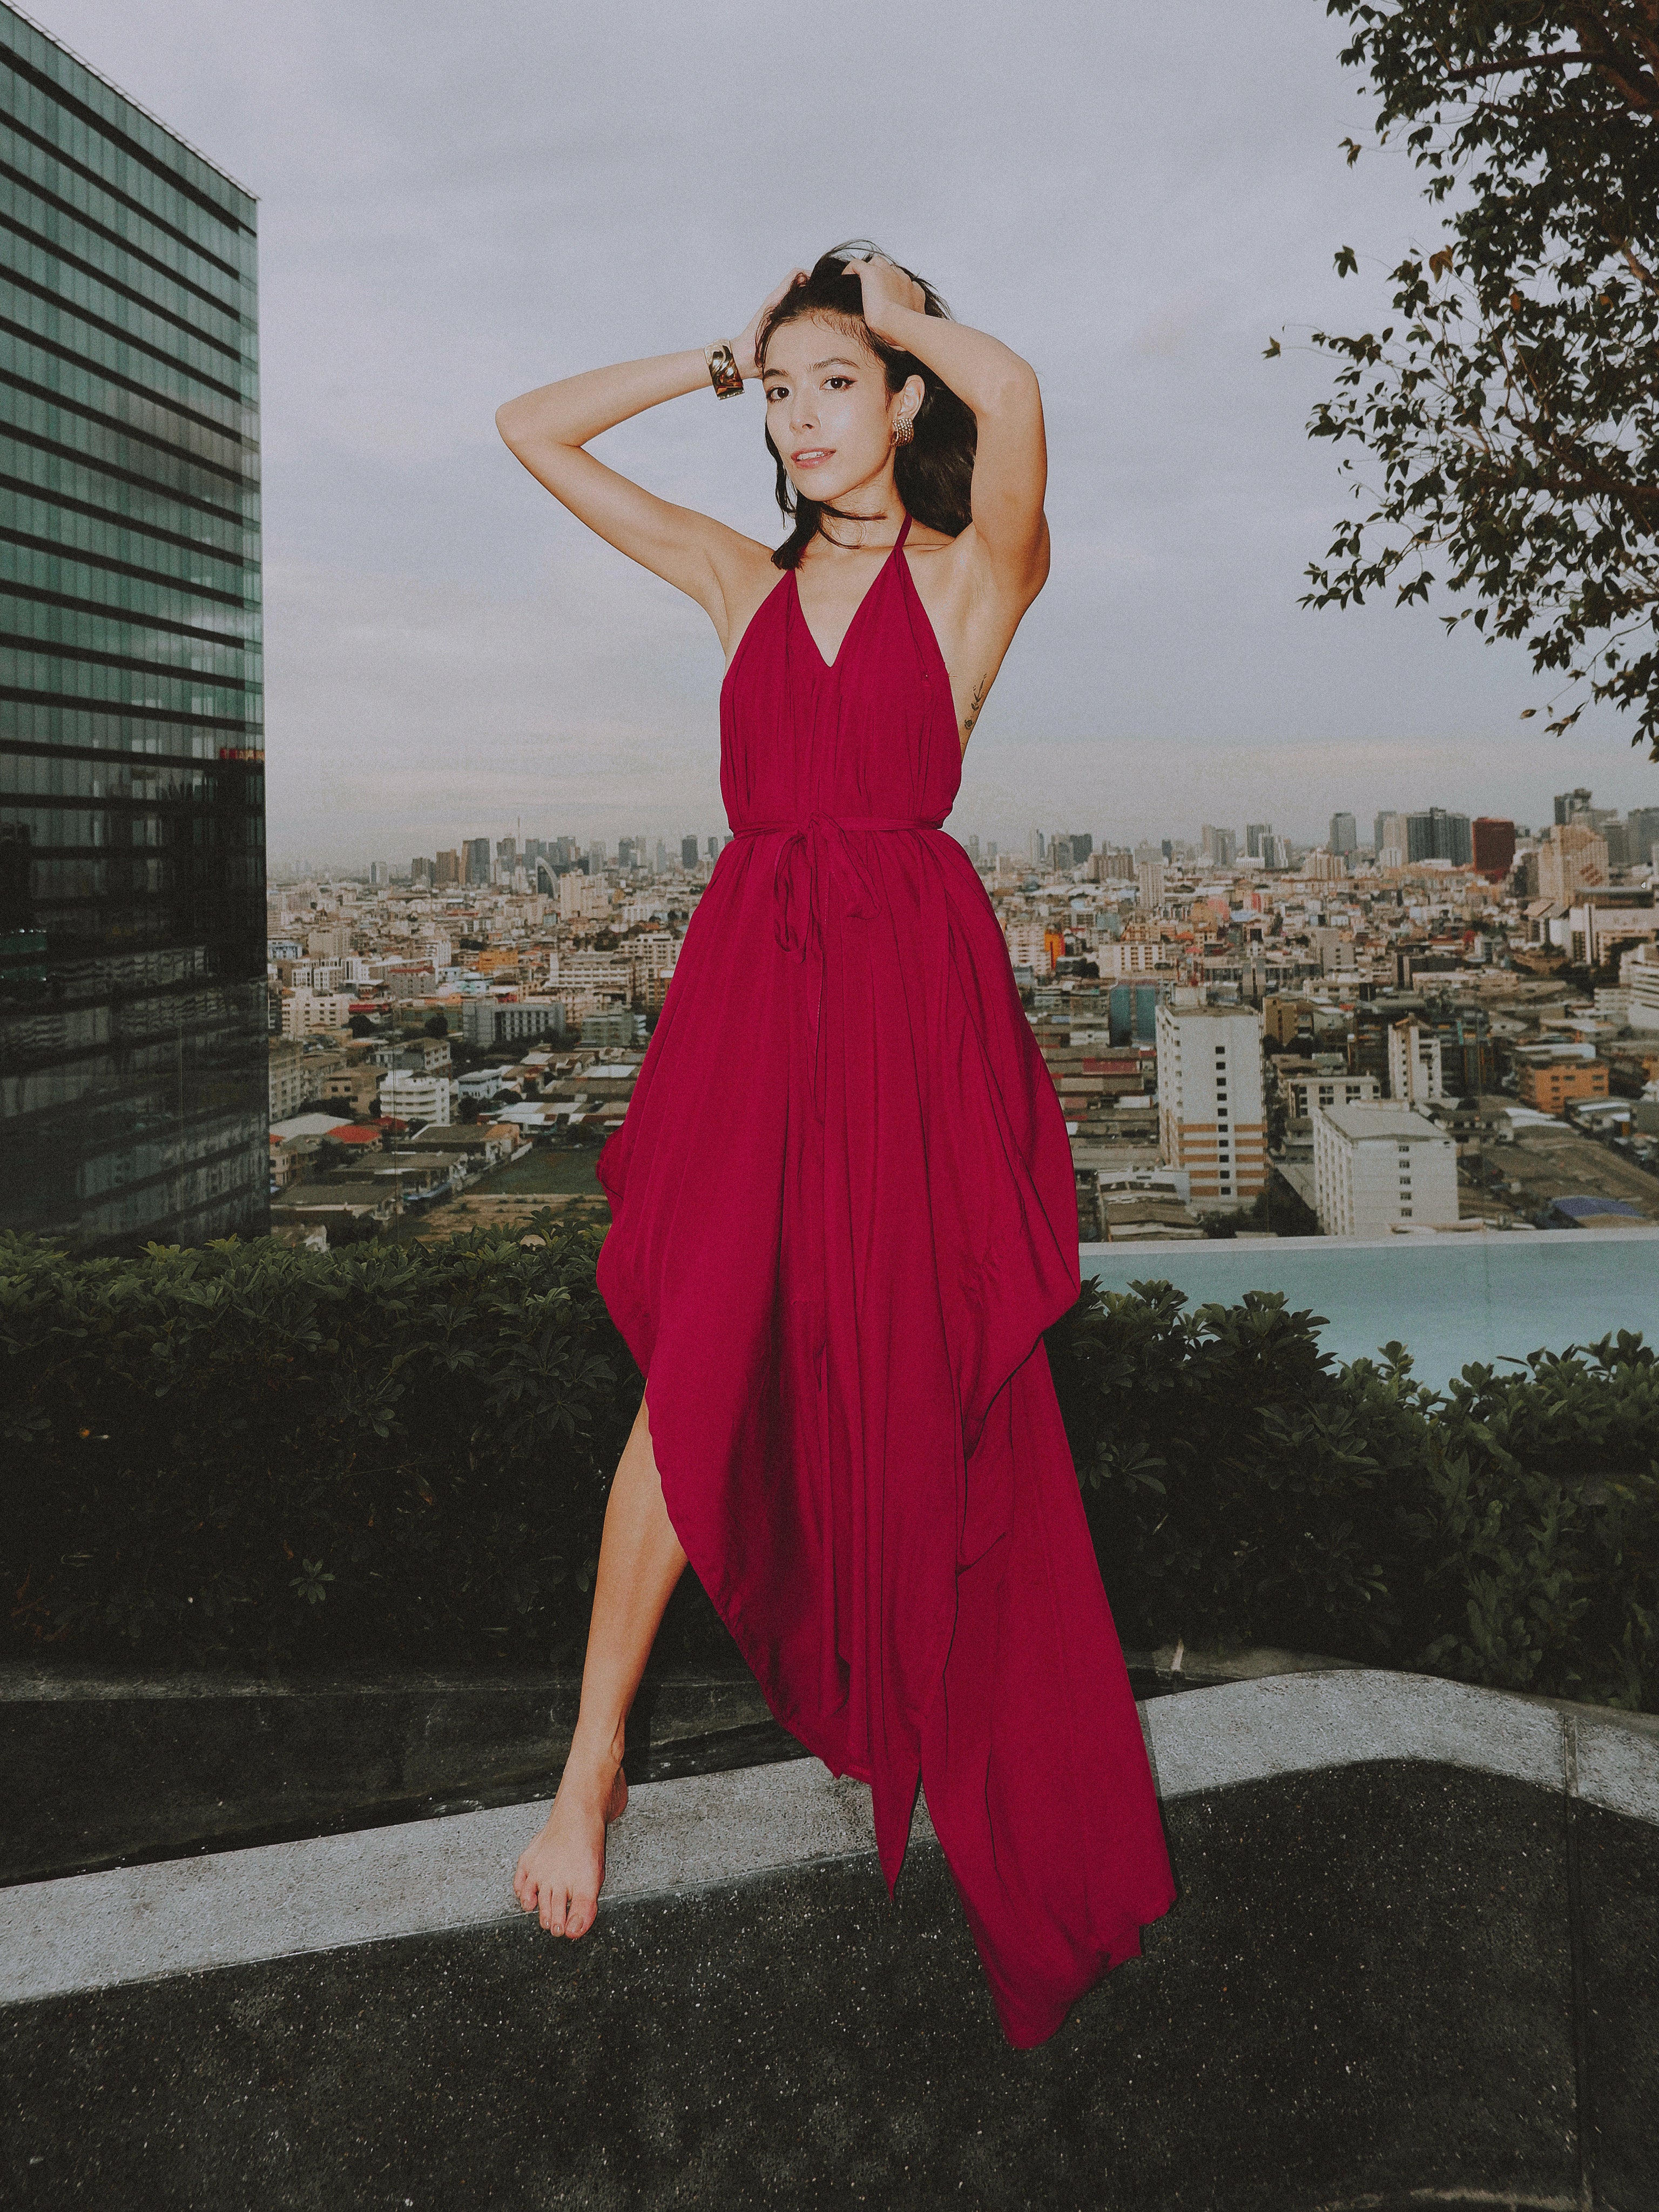 Shop The red burgundy Kaftan Maxi Dress - a unique convertible garment perfect for any event. This sustainable dress radiates a captivating bohemian allure, combining eco-friendliness with fashion.